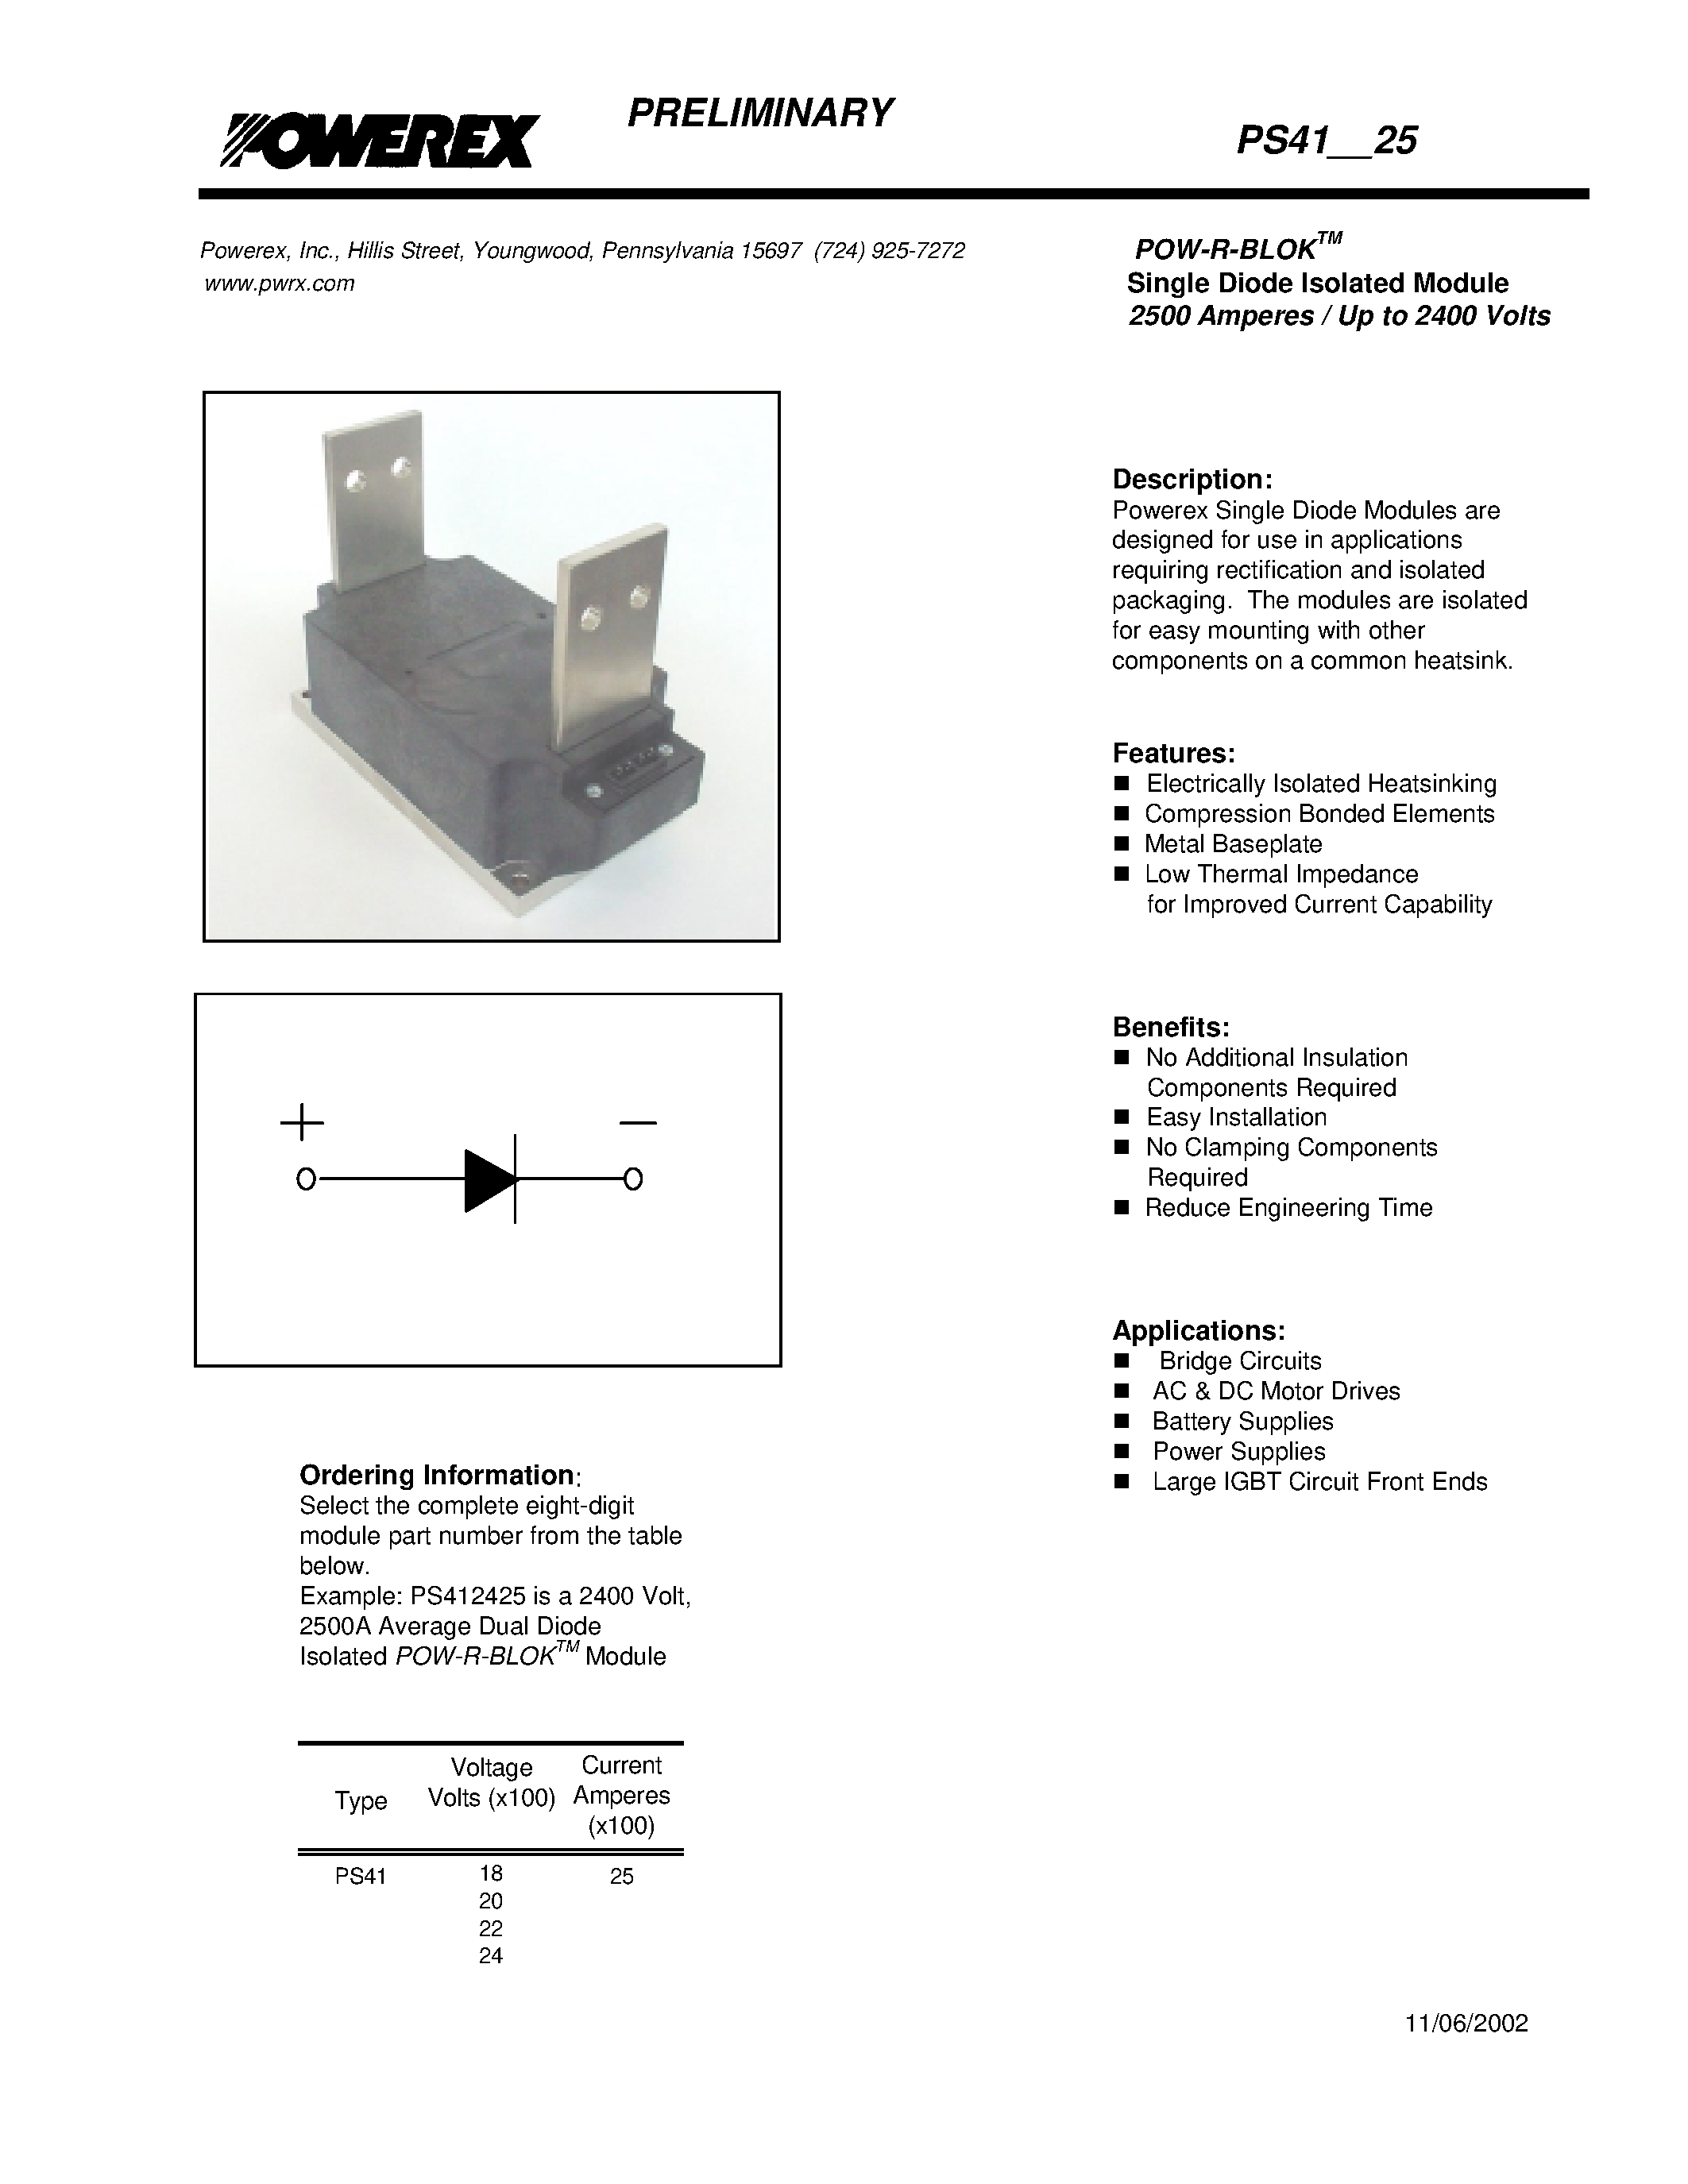 Datasheet P412425 - POW-R-BLOK Single Diode Isolated Module (2500 Amperes / Up to 2400 Volts) page 1